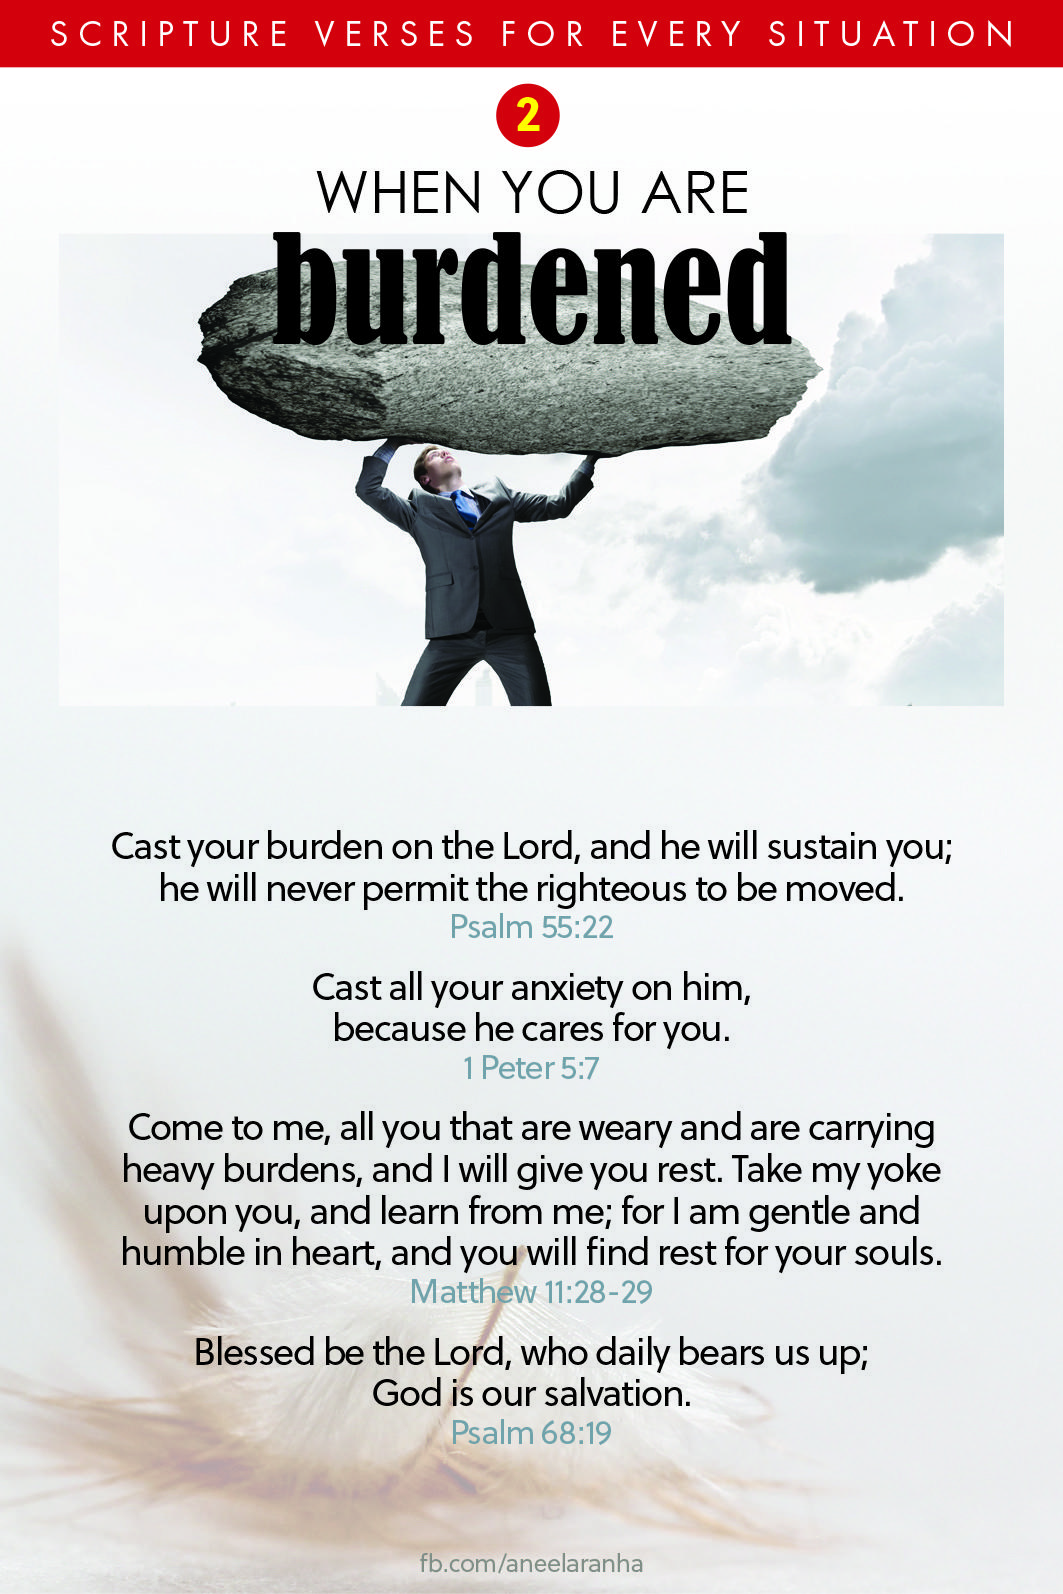 02. Are you feeling burdened?